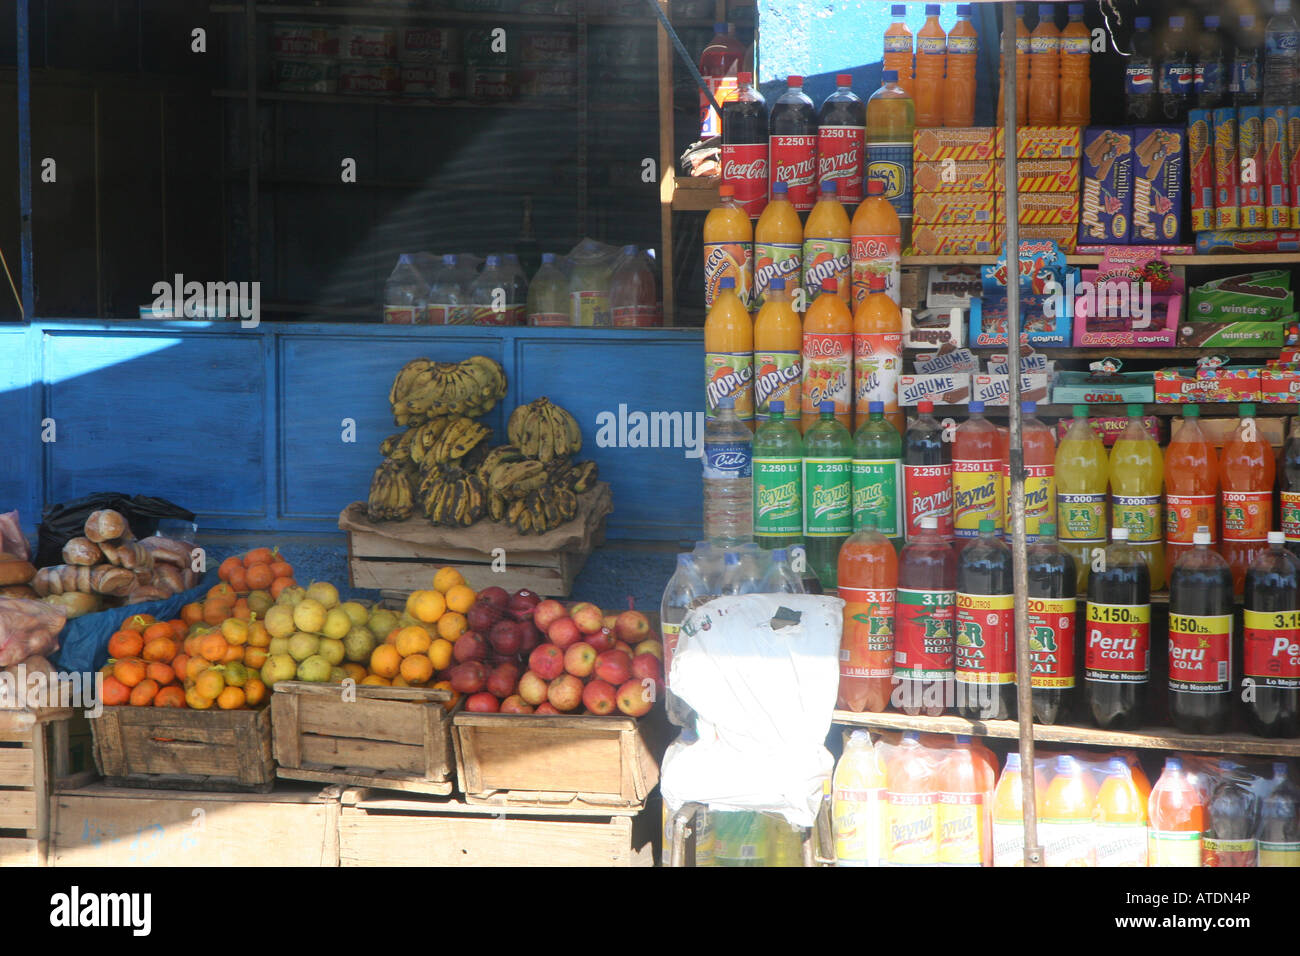 Typical market containing colorful fruits, sodas, beverages in Puno Peru Stock Photo